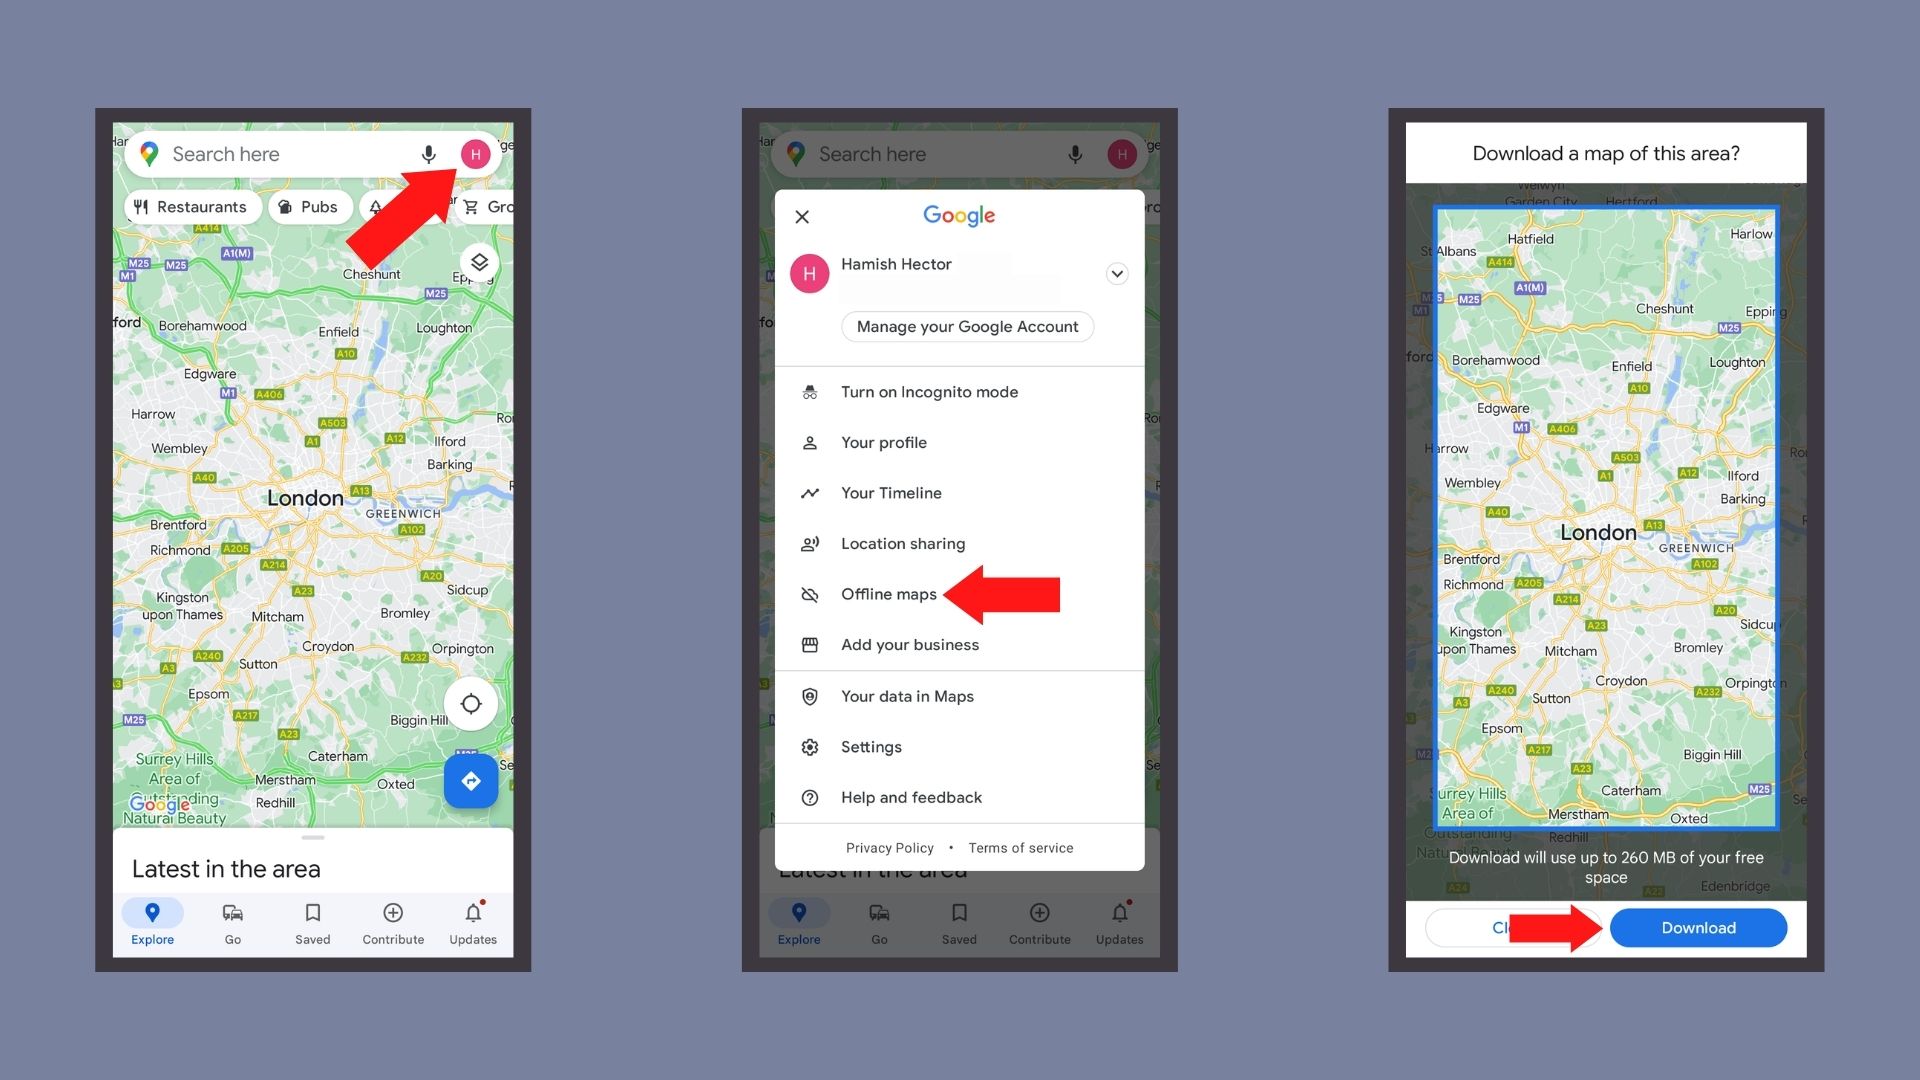 A three part image showing the main steps that you have to follow to create an offline Google Map